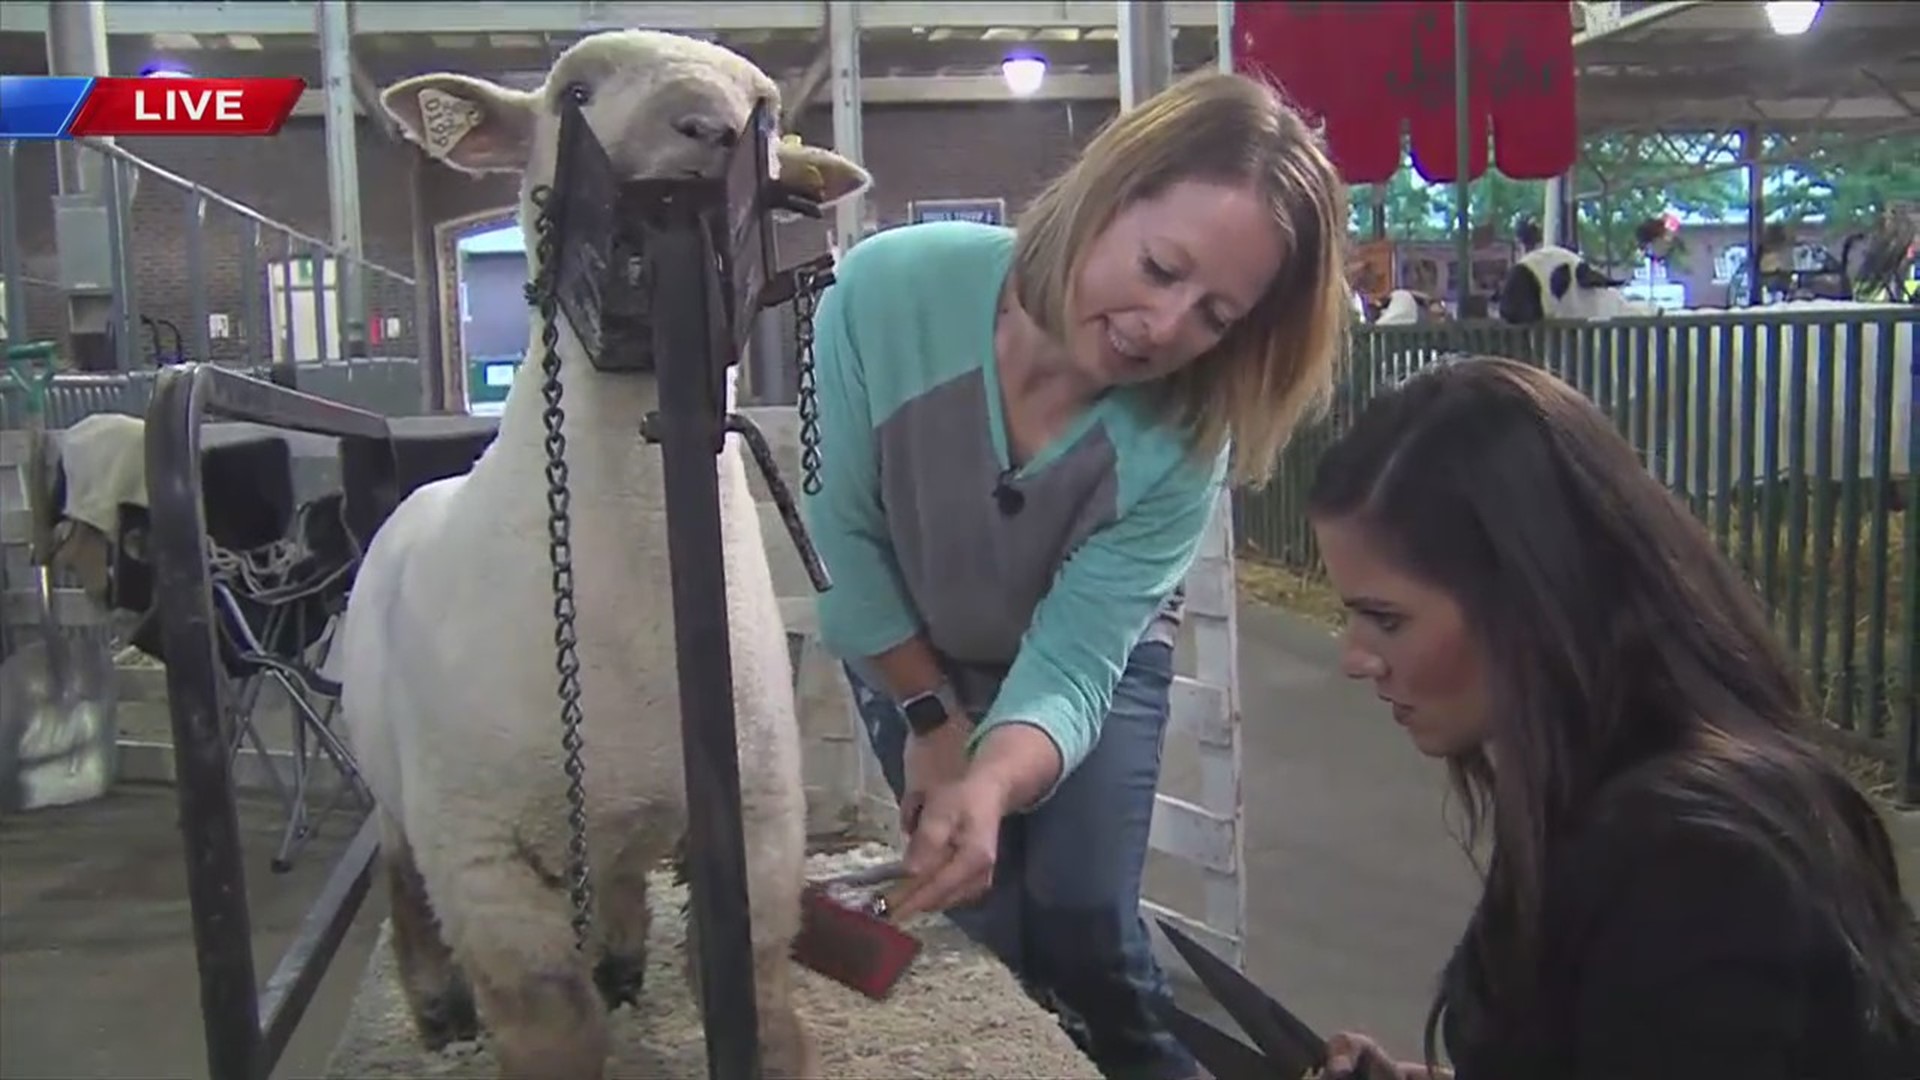 Local 5's Sabrina Ahmed didn't do a bah- job as she learned how to shear a lamb as our morning coverage at the Iowa State Fair.